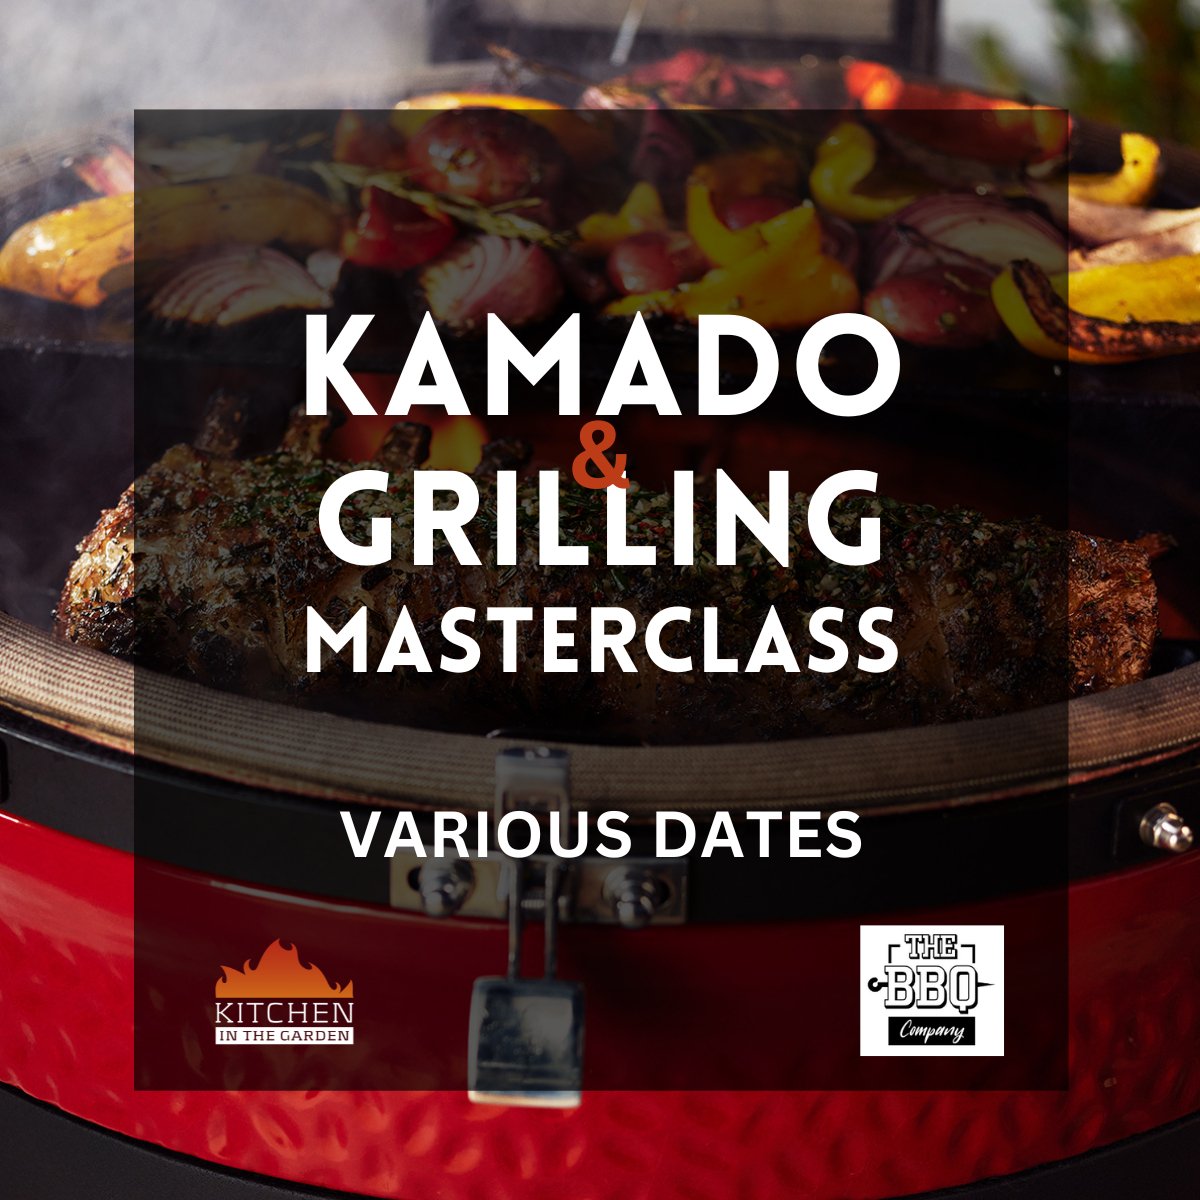 Kamado & Grilling Masterclass by The BBQ Company - Kitchen In The Garden